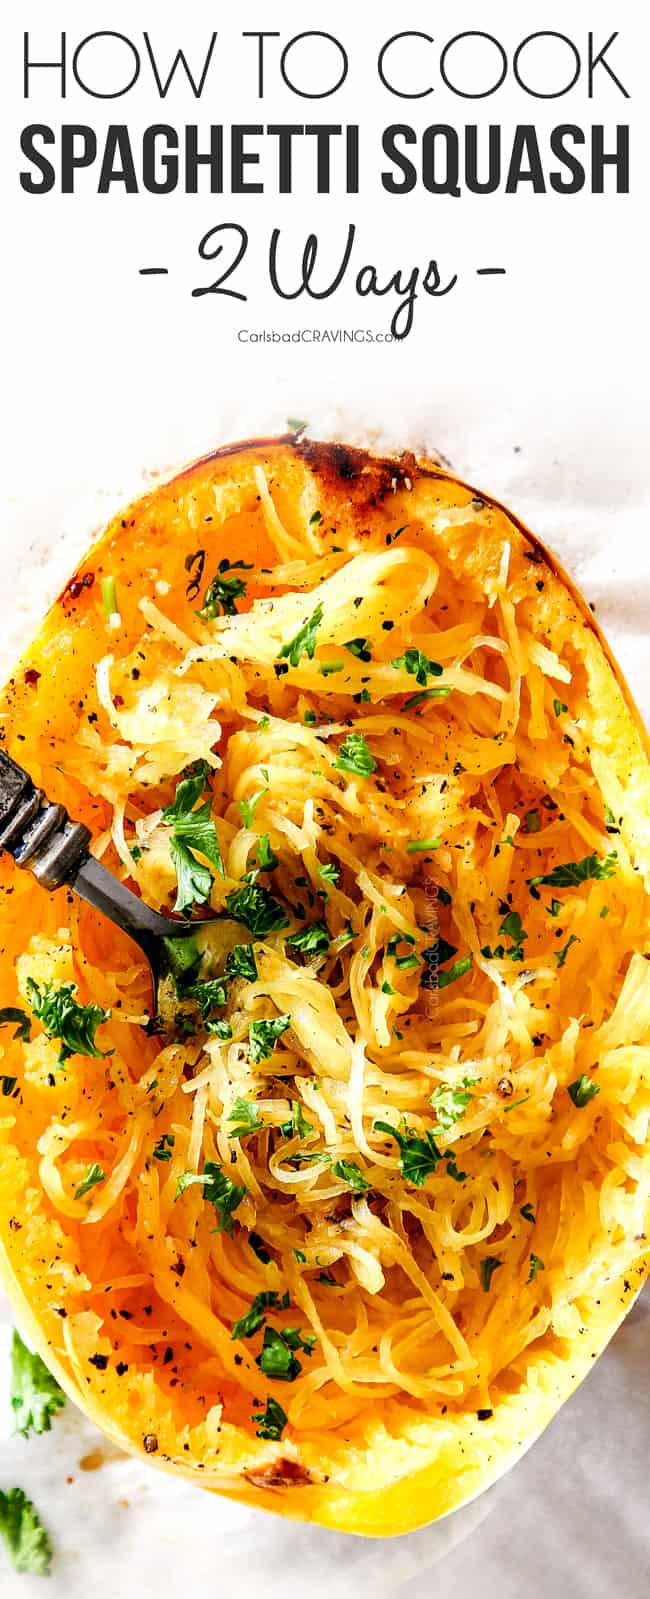 How To Cook Spaghetti Squash In The Microwave Or Oven How To Freeze Etc